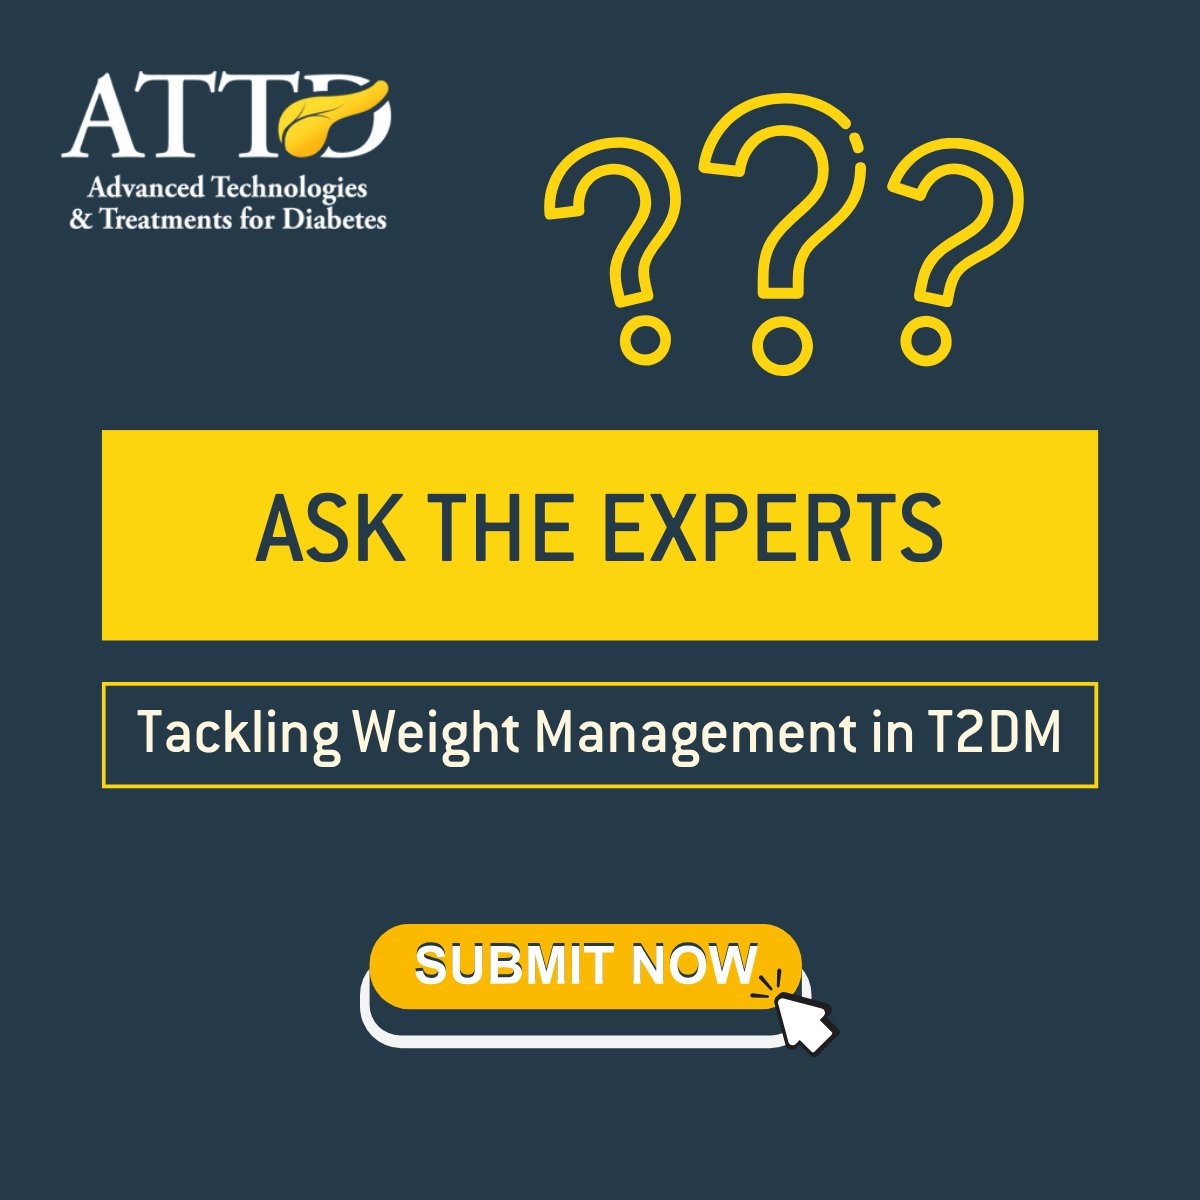 🤔 Do you have any questions related to #WeightManagement and #Diabetes? #AsktheExperts through our dedicated Q&A submission form. Submit your questions 👇 bit.ly/3TSS055 Our experts will address these questions during a live session soon. #ATTD24 #OnlineEducation